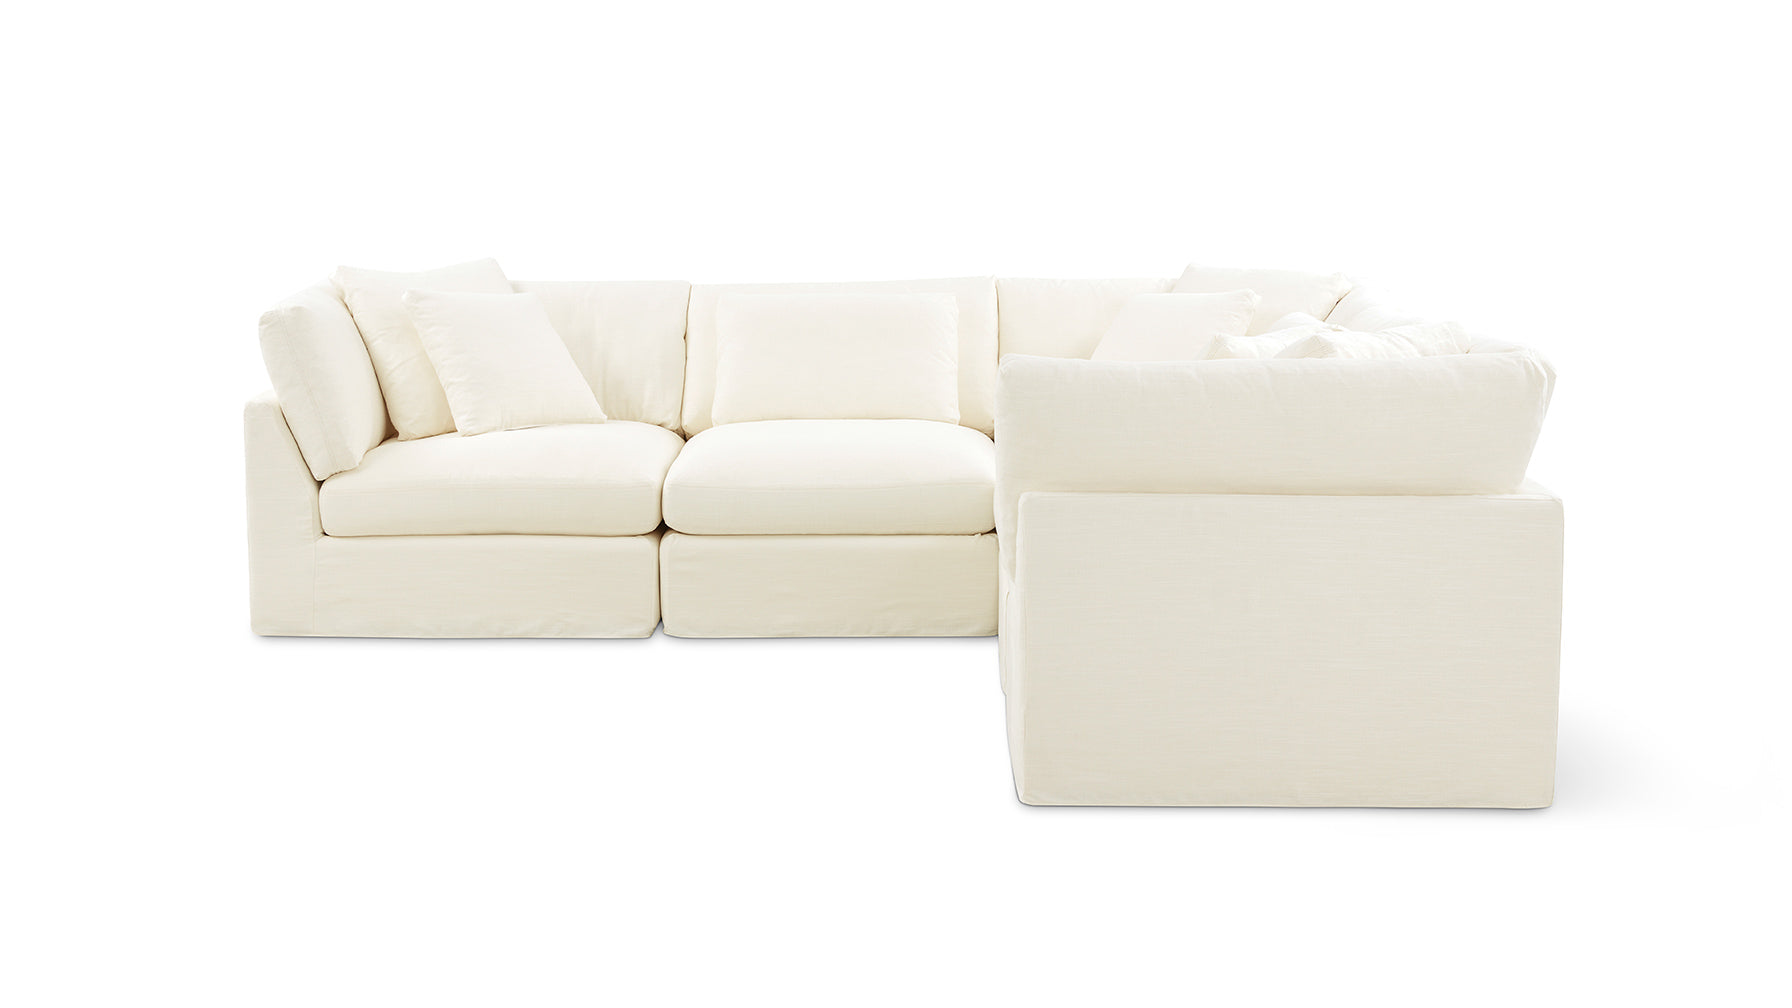 Get Together™ 5-Piece Modular Sectional Closed, Large, Cream Linen - Image 1